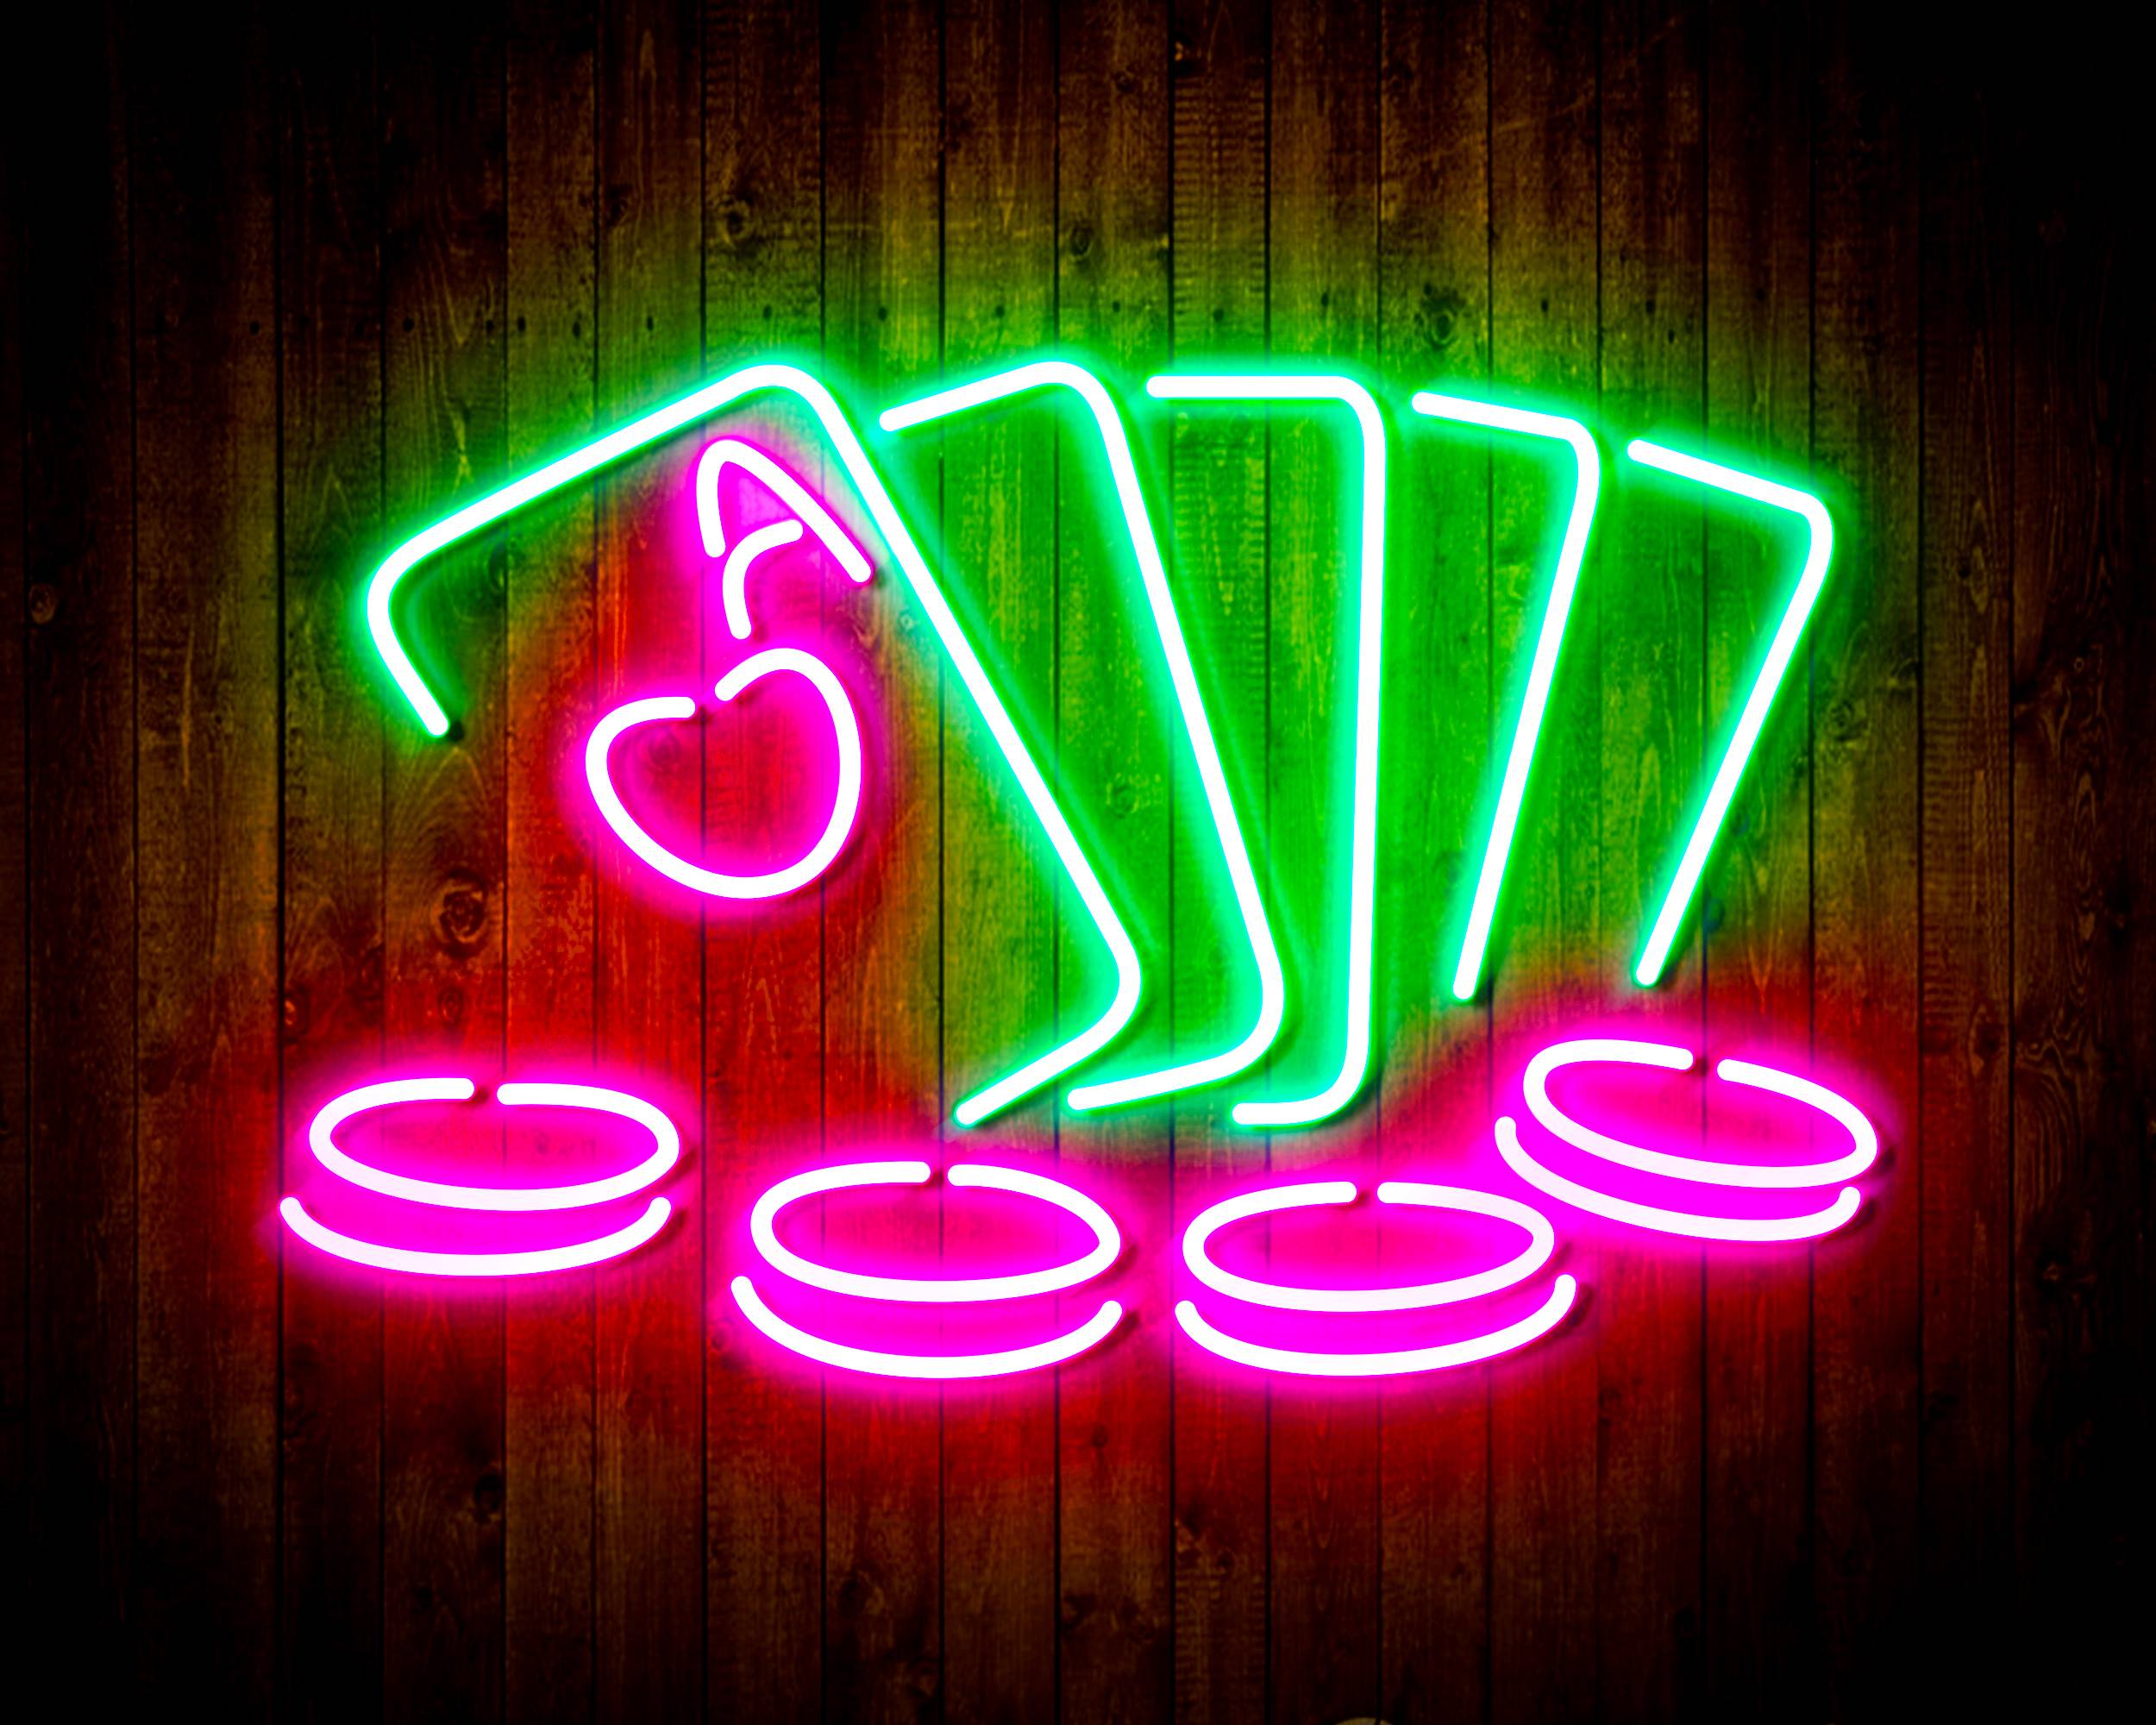 Cards with Coins for Crown Royal Handmade LED Neon Light Sign